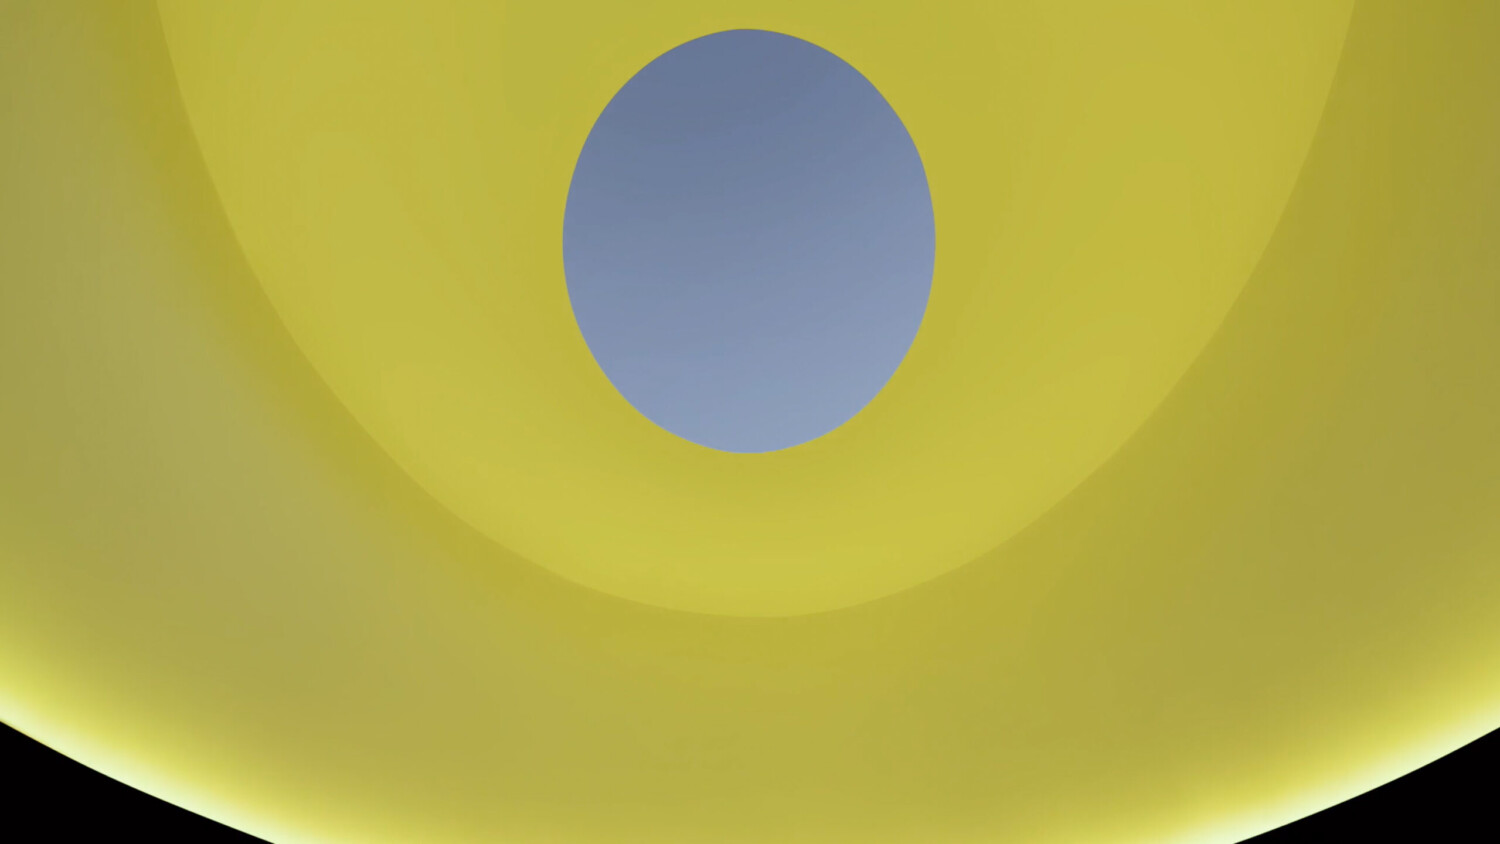 ‘You Who Look’ – A James Turrell short Documentary on Light and Perception